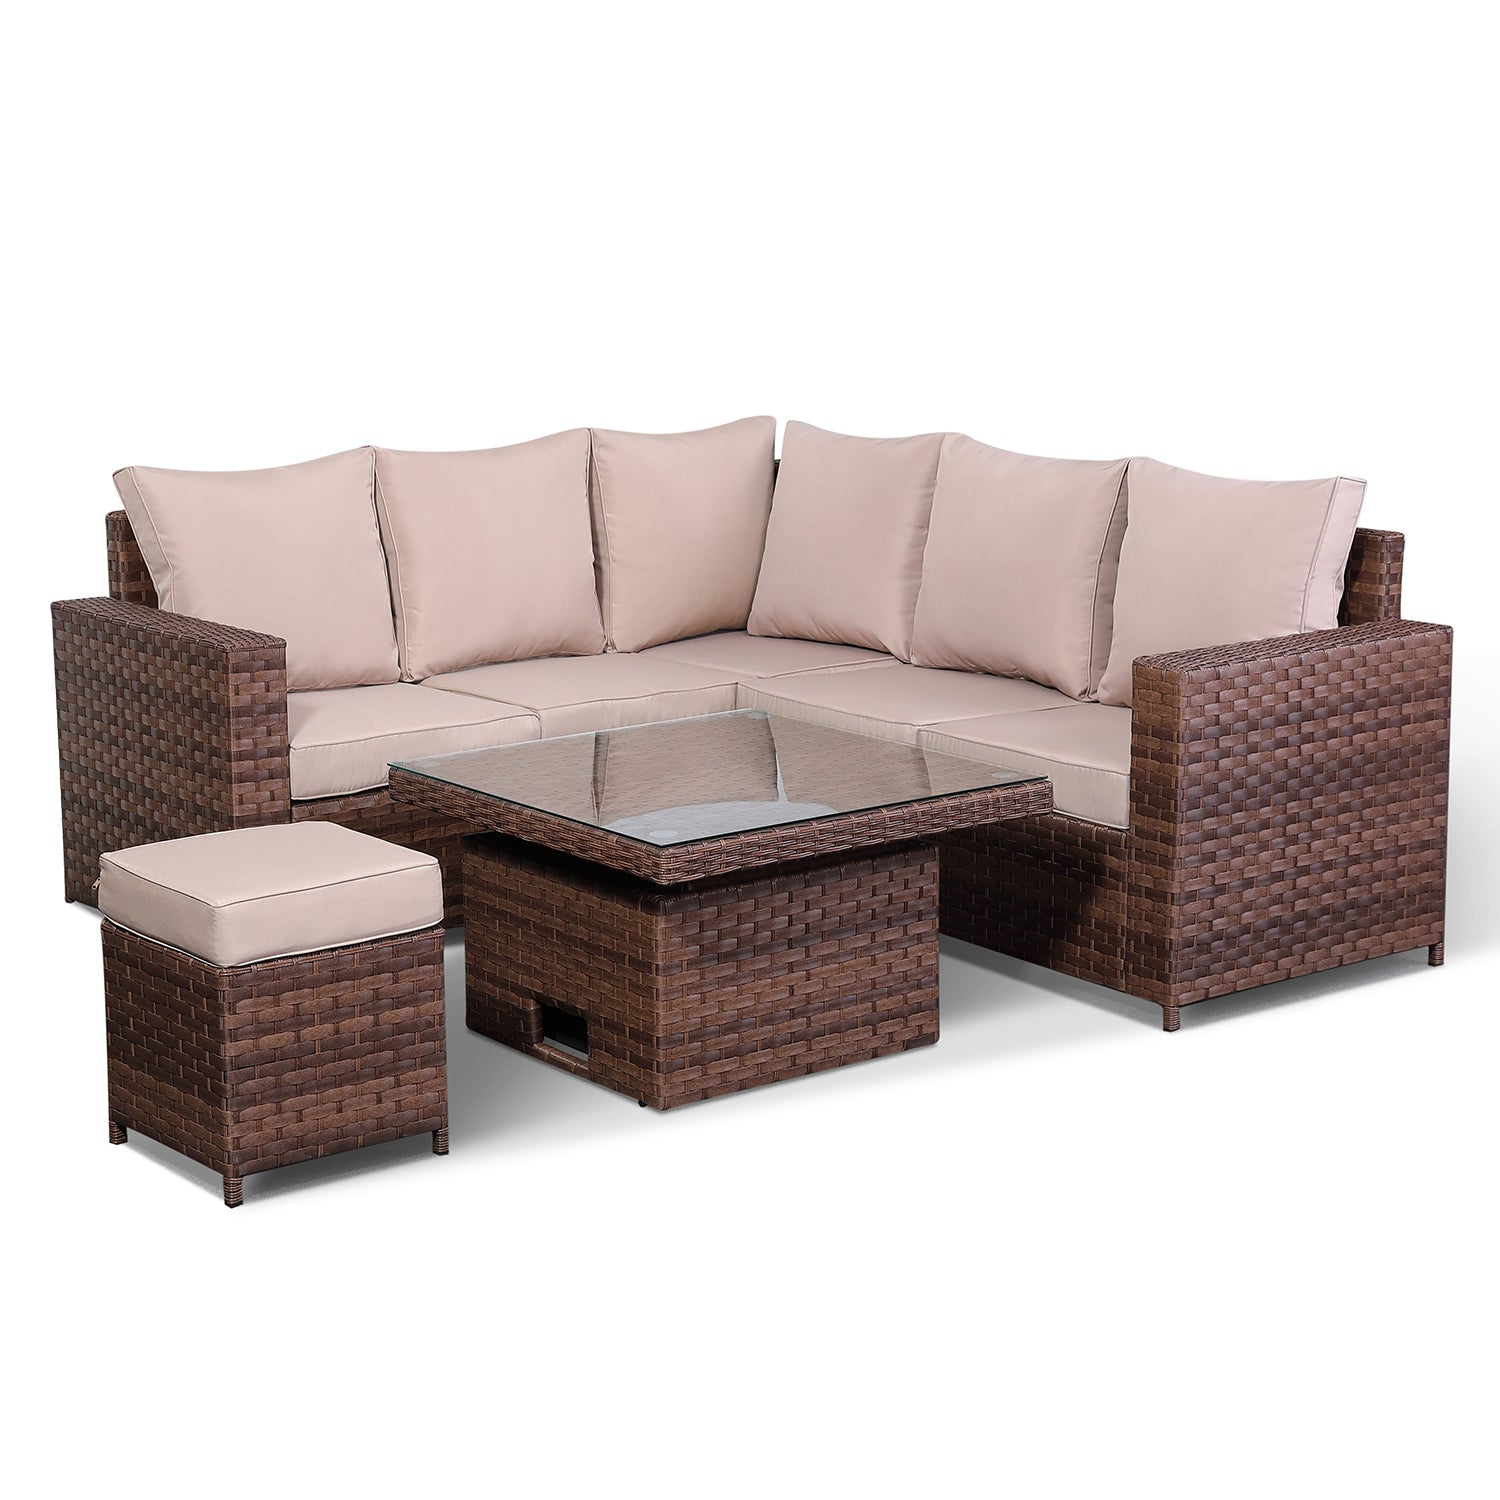 Canna Range High Back Small Dining Corner Sofa Set In Large Brown